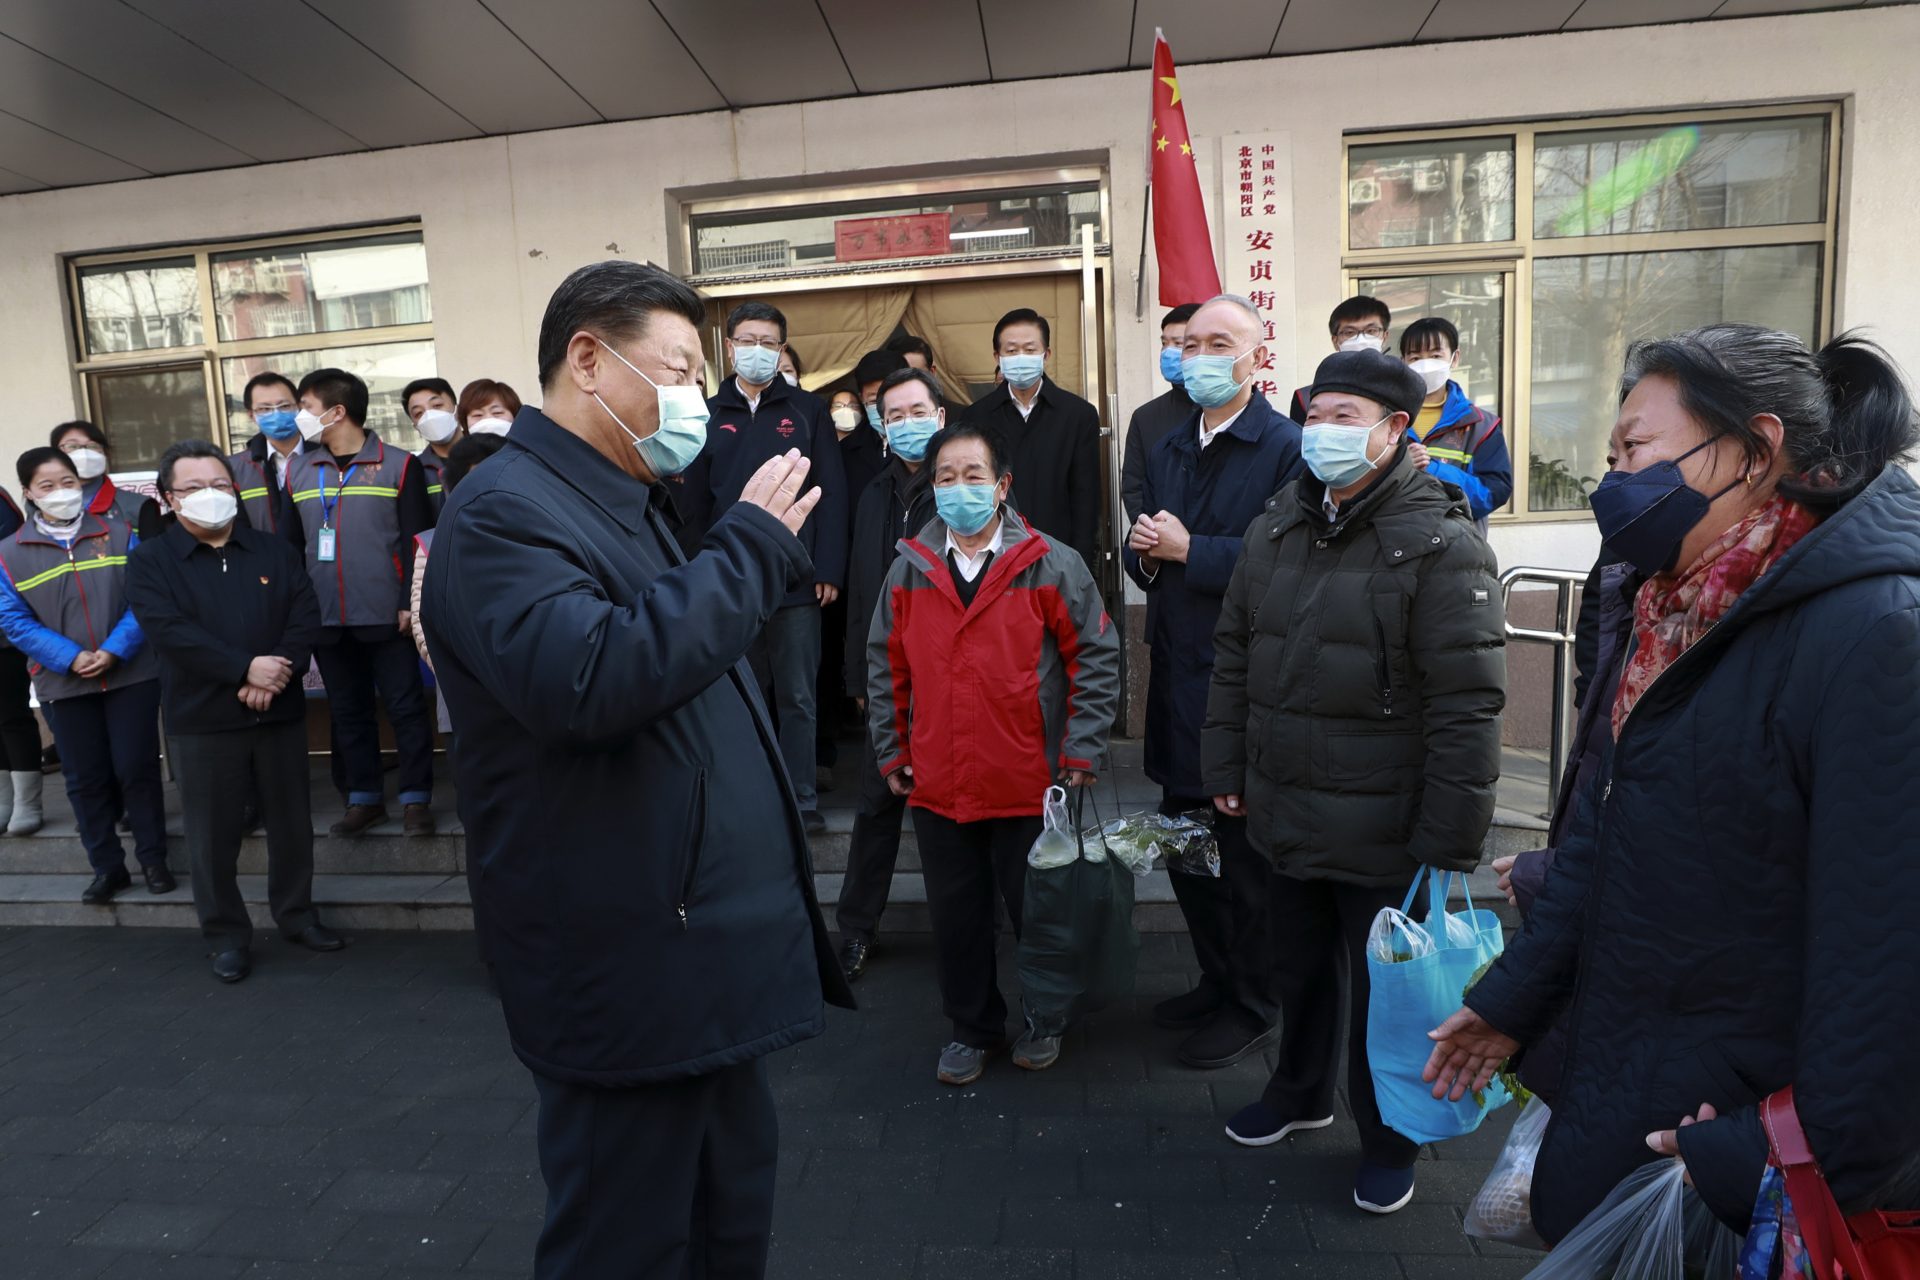 In this photo released by Xinhua News Agency, Chinese President Xi Jinping wearing a protective face mask speaks to residents as he inspects the novel coronavirus pneumonia prevention and control work at a neighbourhoods in Beijing, Monday, Feb. 10, 2020. China reported a rise in new virus cases on Monday, possibly denting optimism that its disease control measures like isolating major cities might be working, while Japan reported dozens of new cases aboard a quarantined cruise ship.